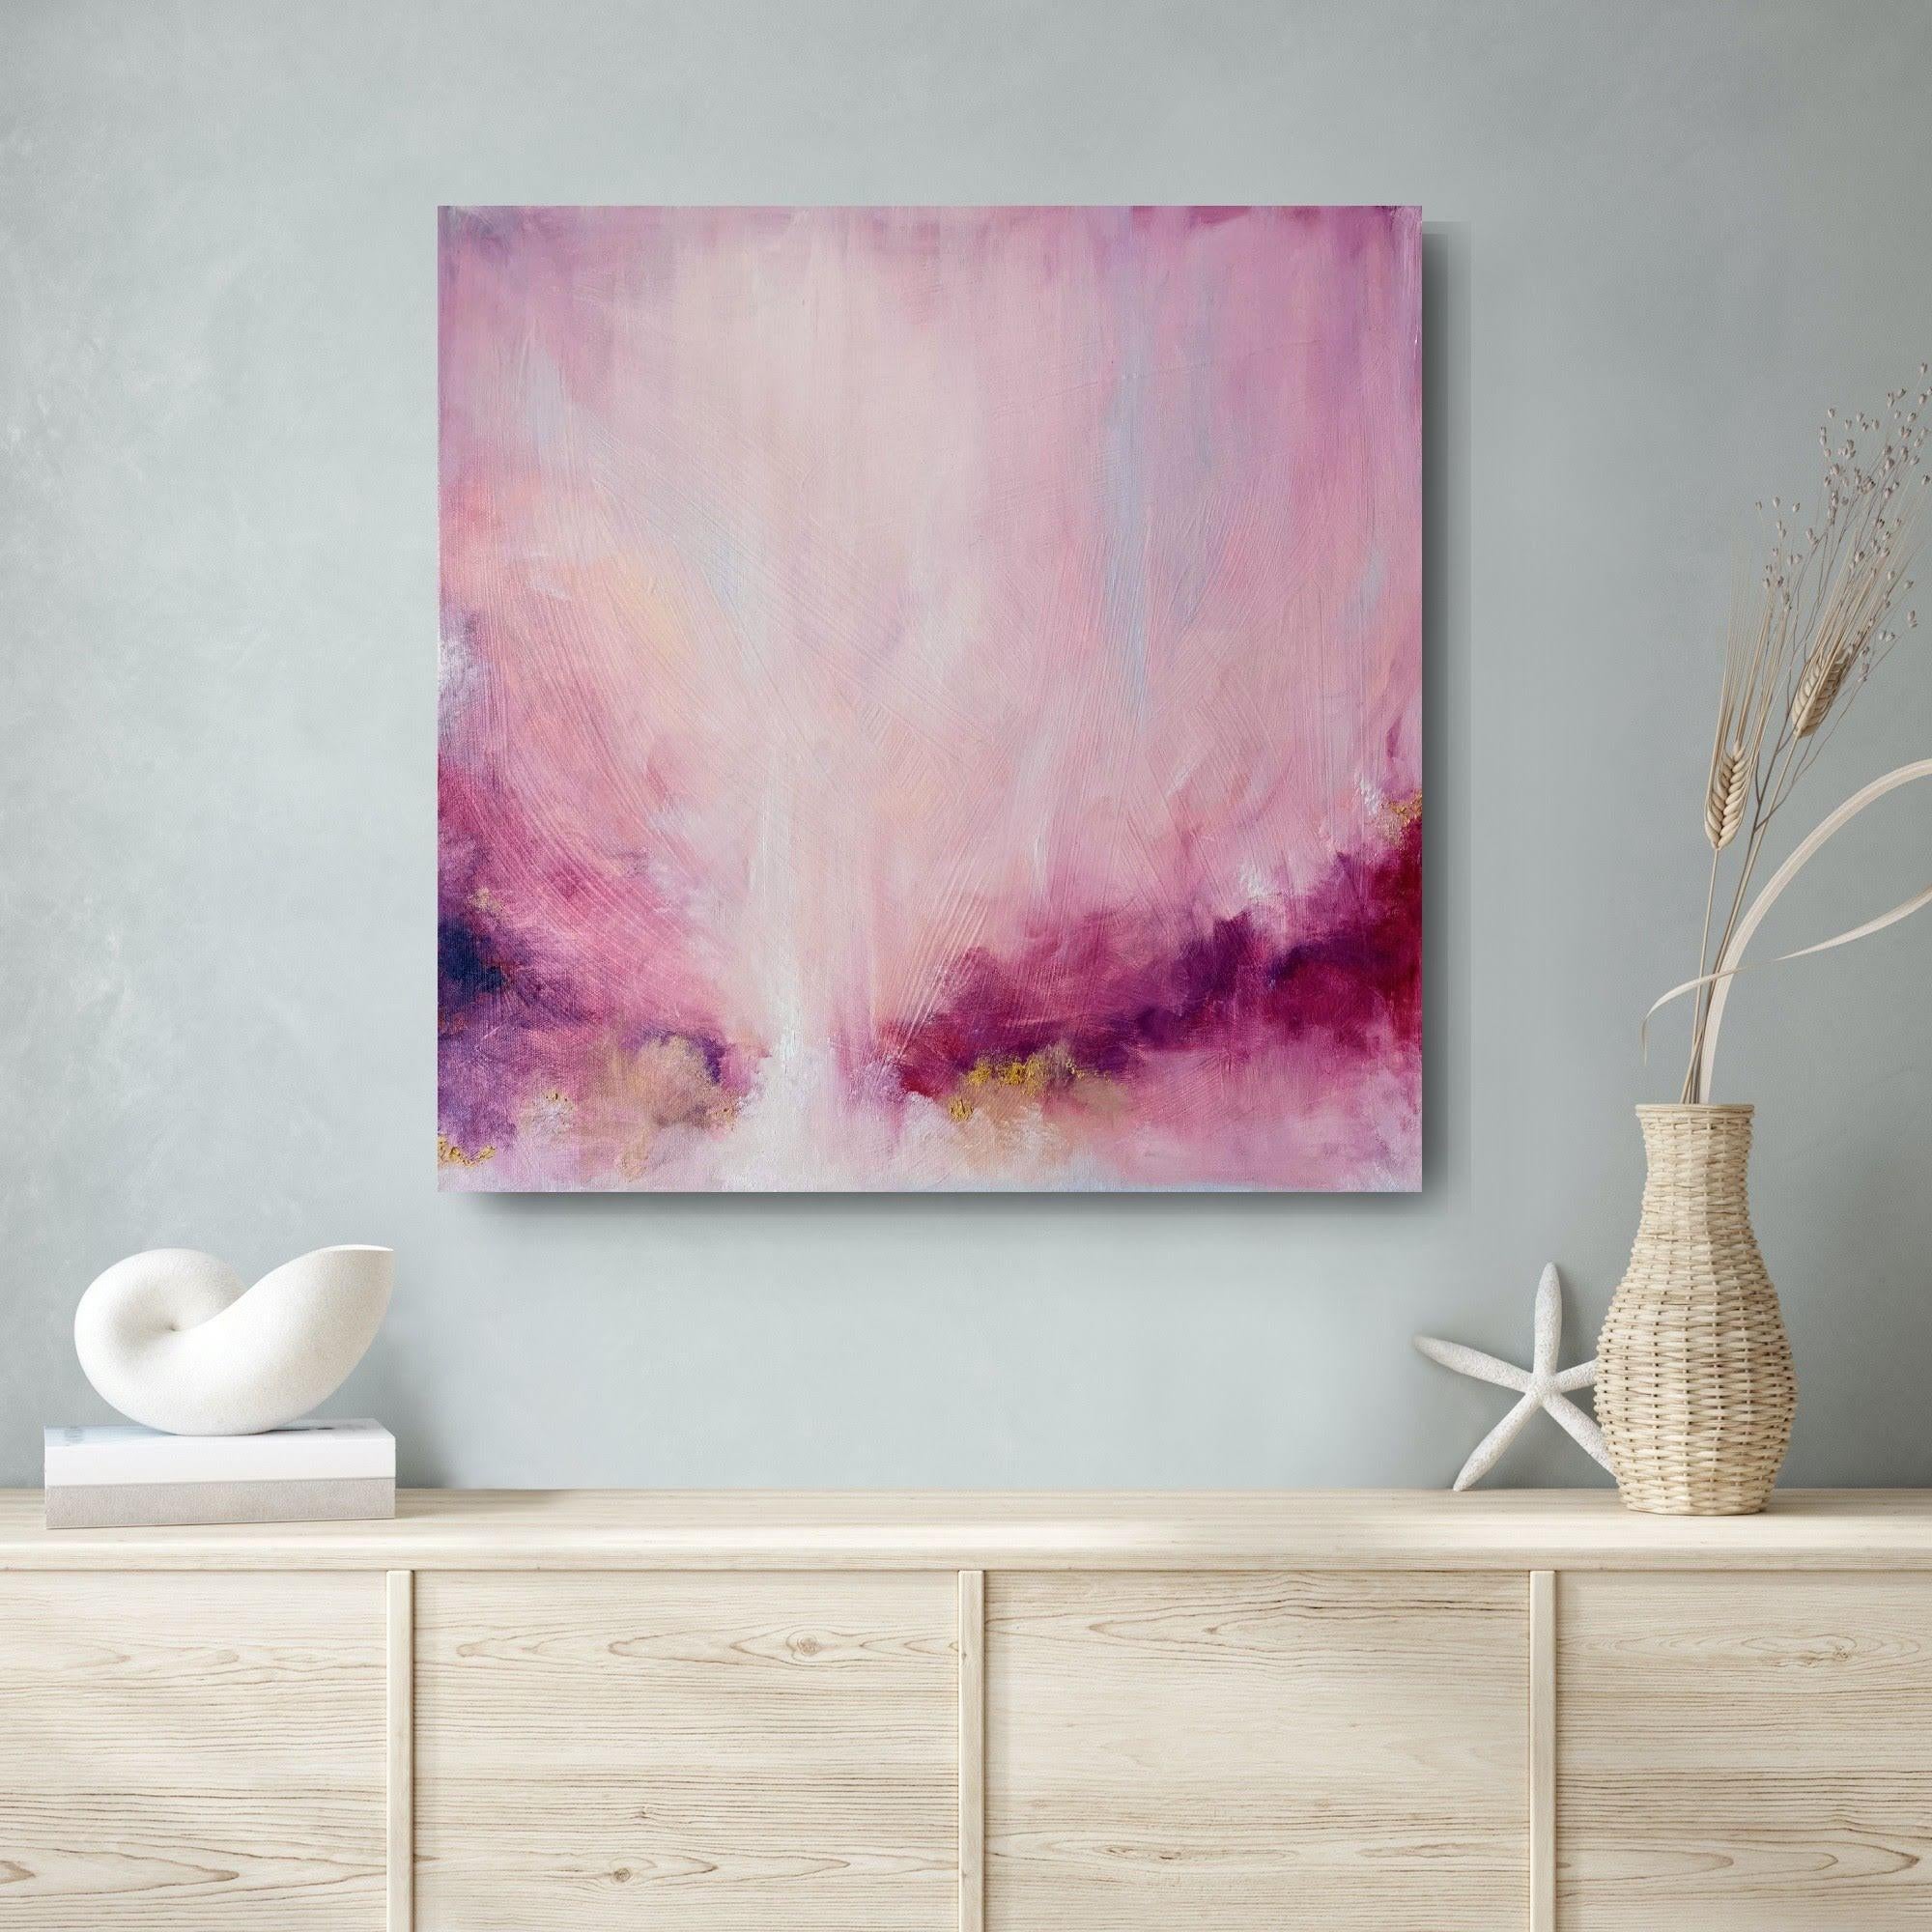 This is why I love you - Pink and gold abstract painting 3